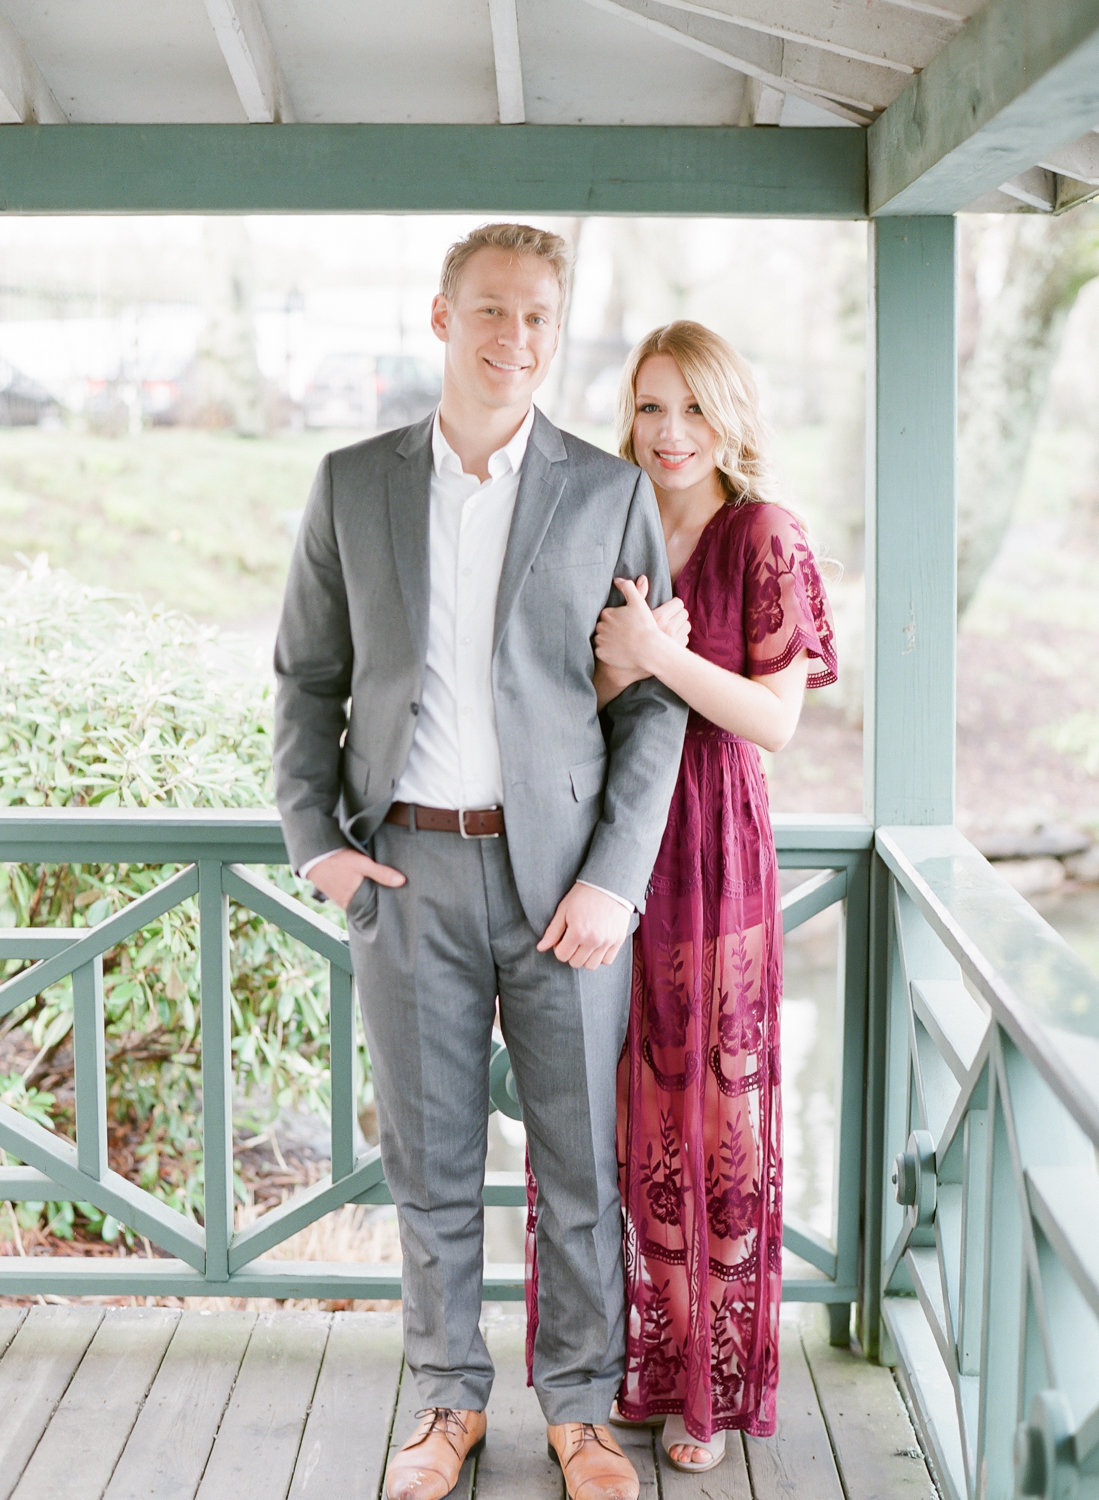 Jacqueline Anne Photography - Amanda and Brent-81